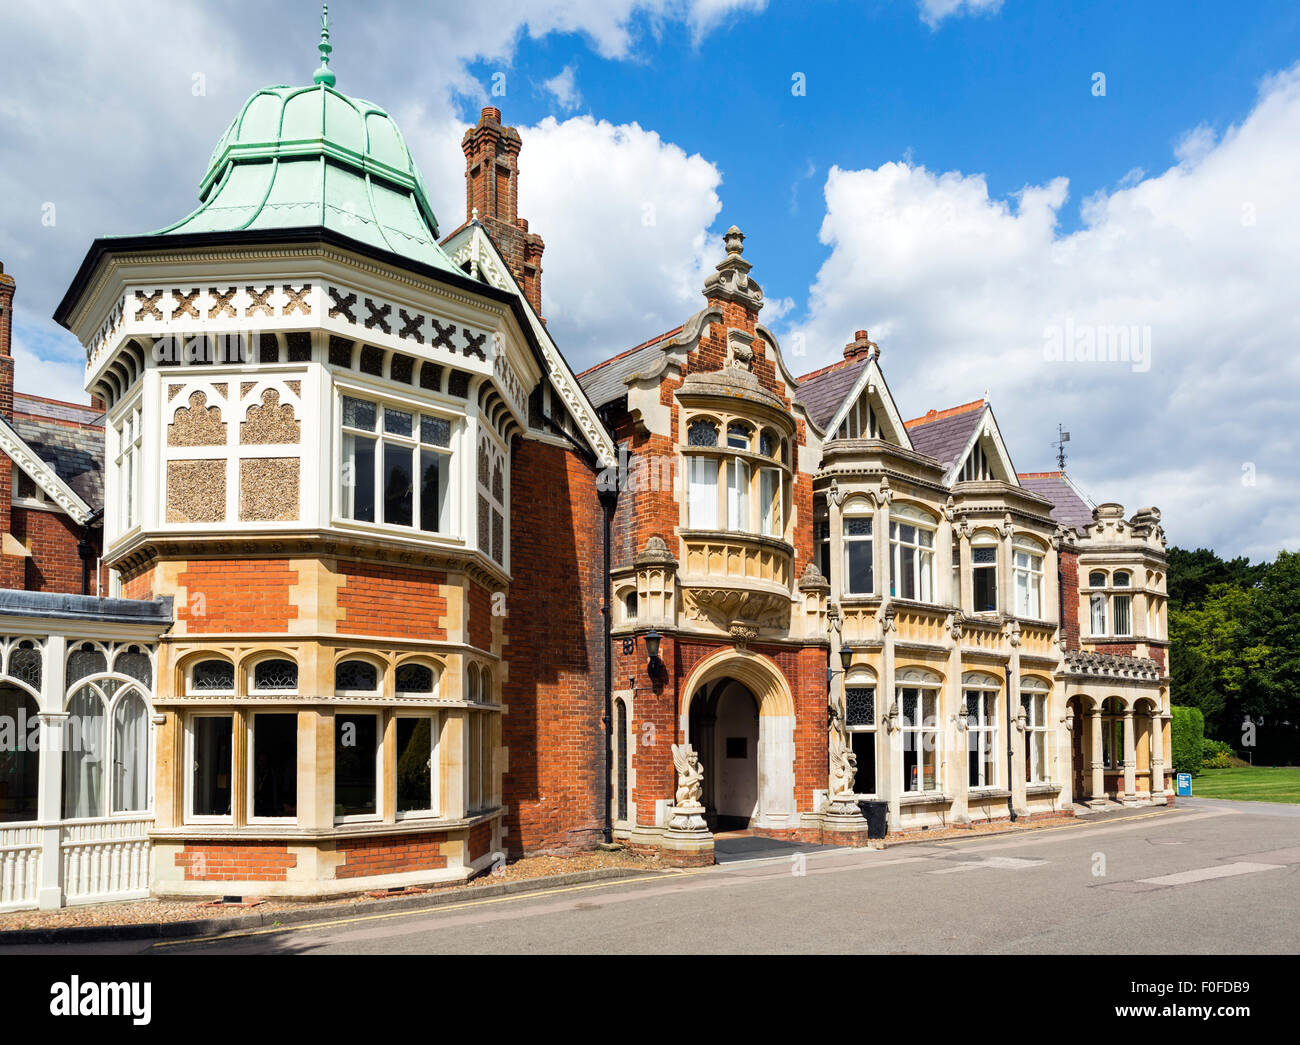 The mansion house at Bletchley Park, Buckinghamshire, England, UK Stock Photo